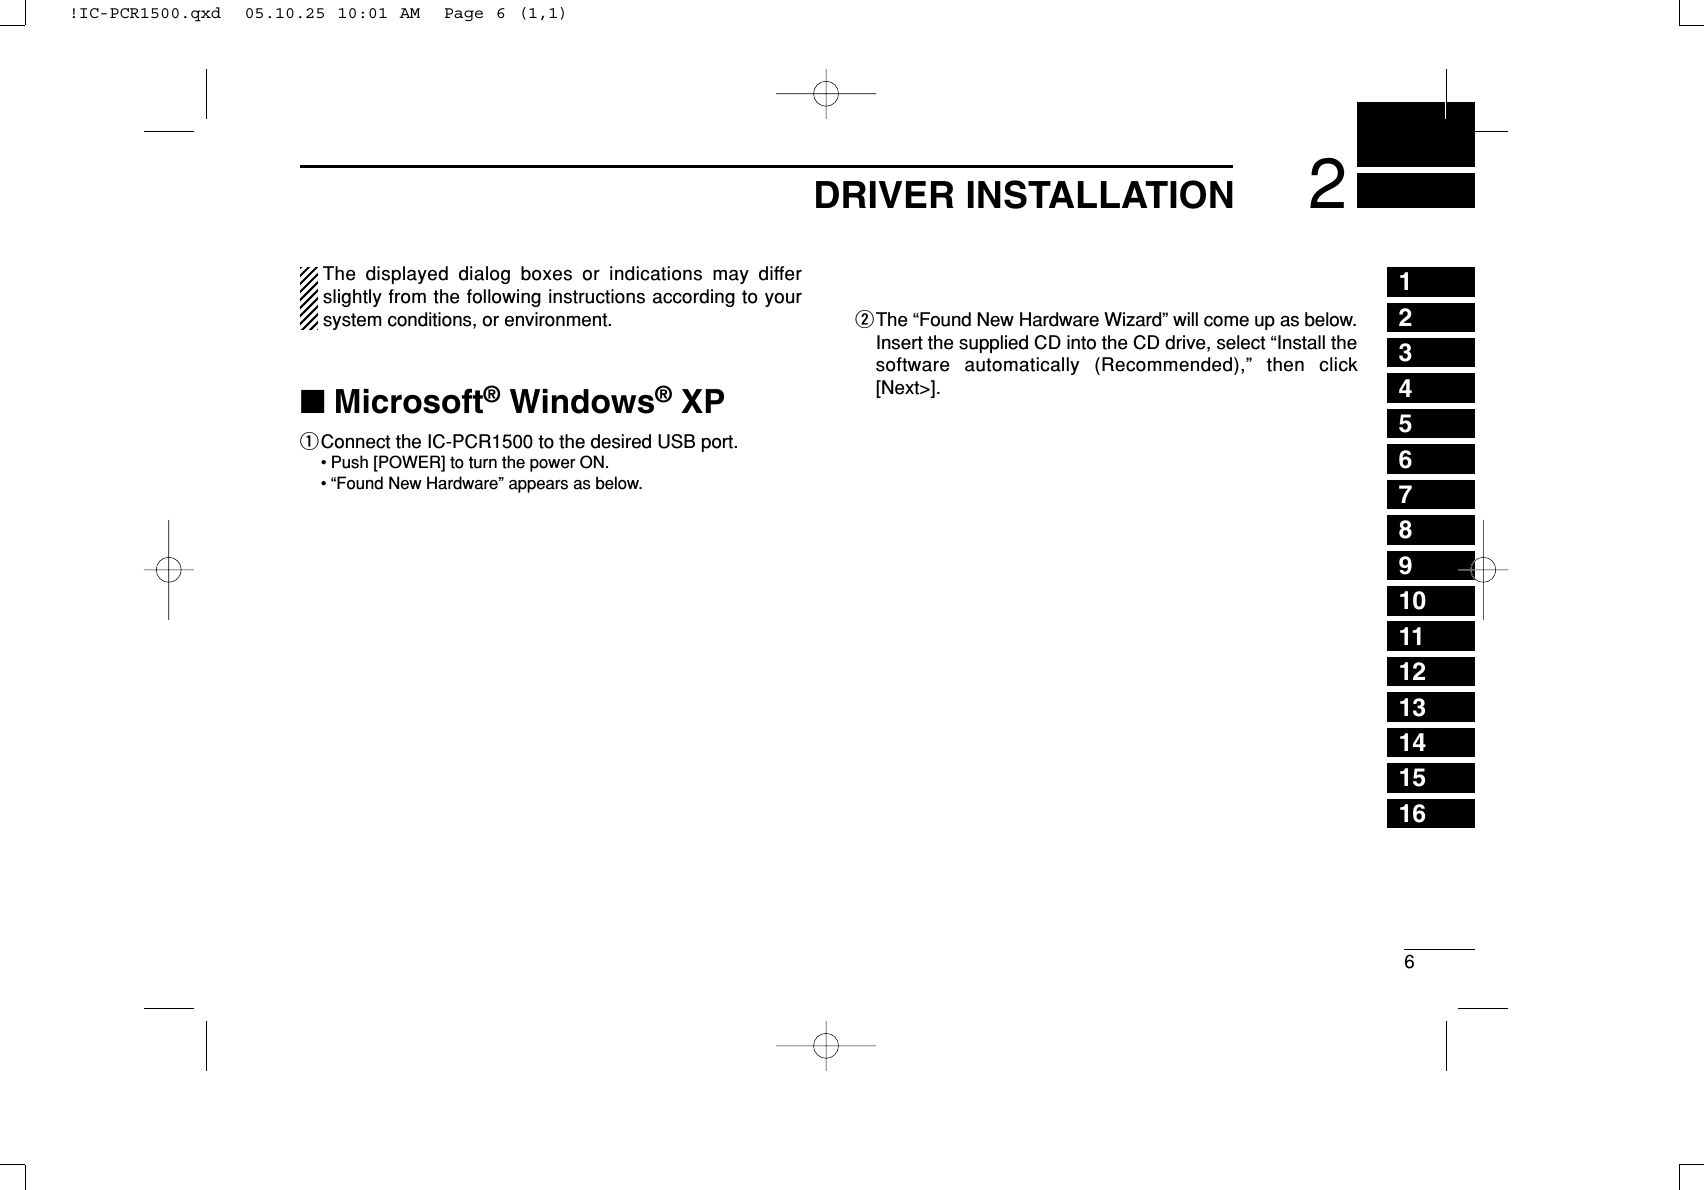 62DRIVER INSTALLATION12345678910111213141516The displayed dialog boxes or indications may differslightly from the following instructions according to yoursystem conditions, or environment.■Microsoft®Windows®XPqConnect the IC-PCR1500 to the desired USB port.• Push [POWER] to turn the power ON.• “Found New Hardware” appears as below.wThe “Found New Hardware Wizard” will come up as below.Insert the supplied CD into the CD drive, select “Install thesoftware automatically (Recommended),” then click[Next&gt;].!IC-PCR1500.qxd  05.10.25 10:01 AM  Page 6 (1,1)